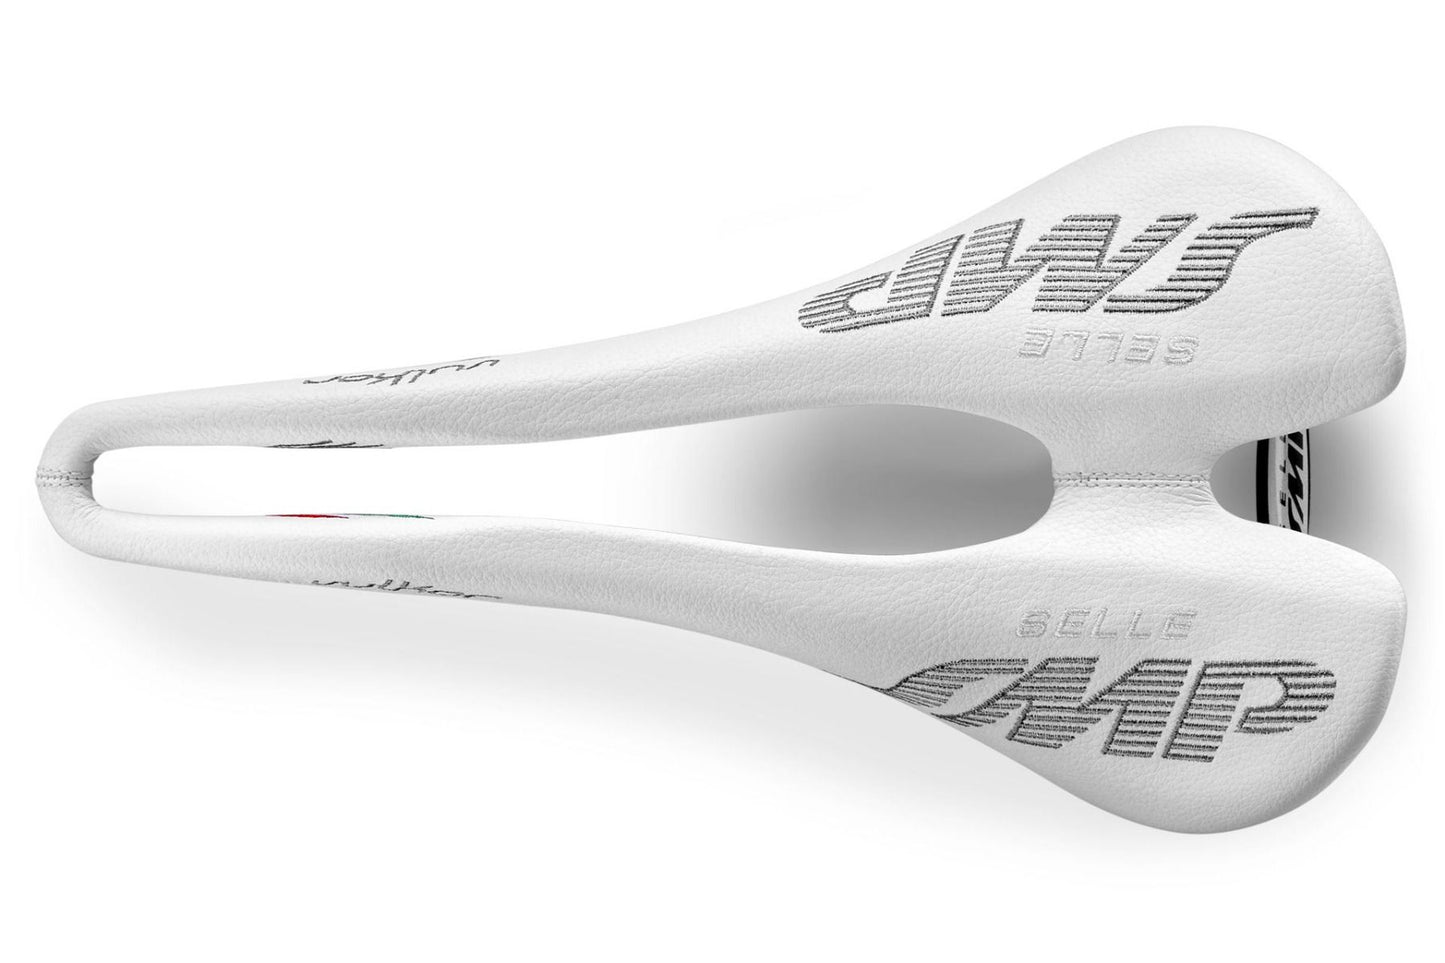 Selle SMP Vulkor Saddle with Steel Rails (White)